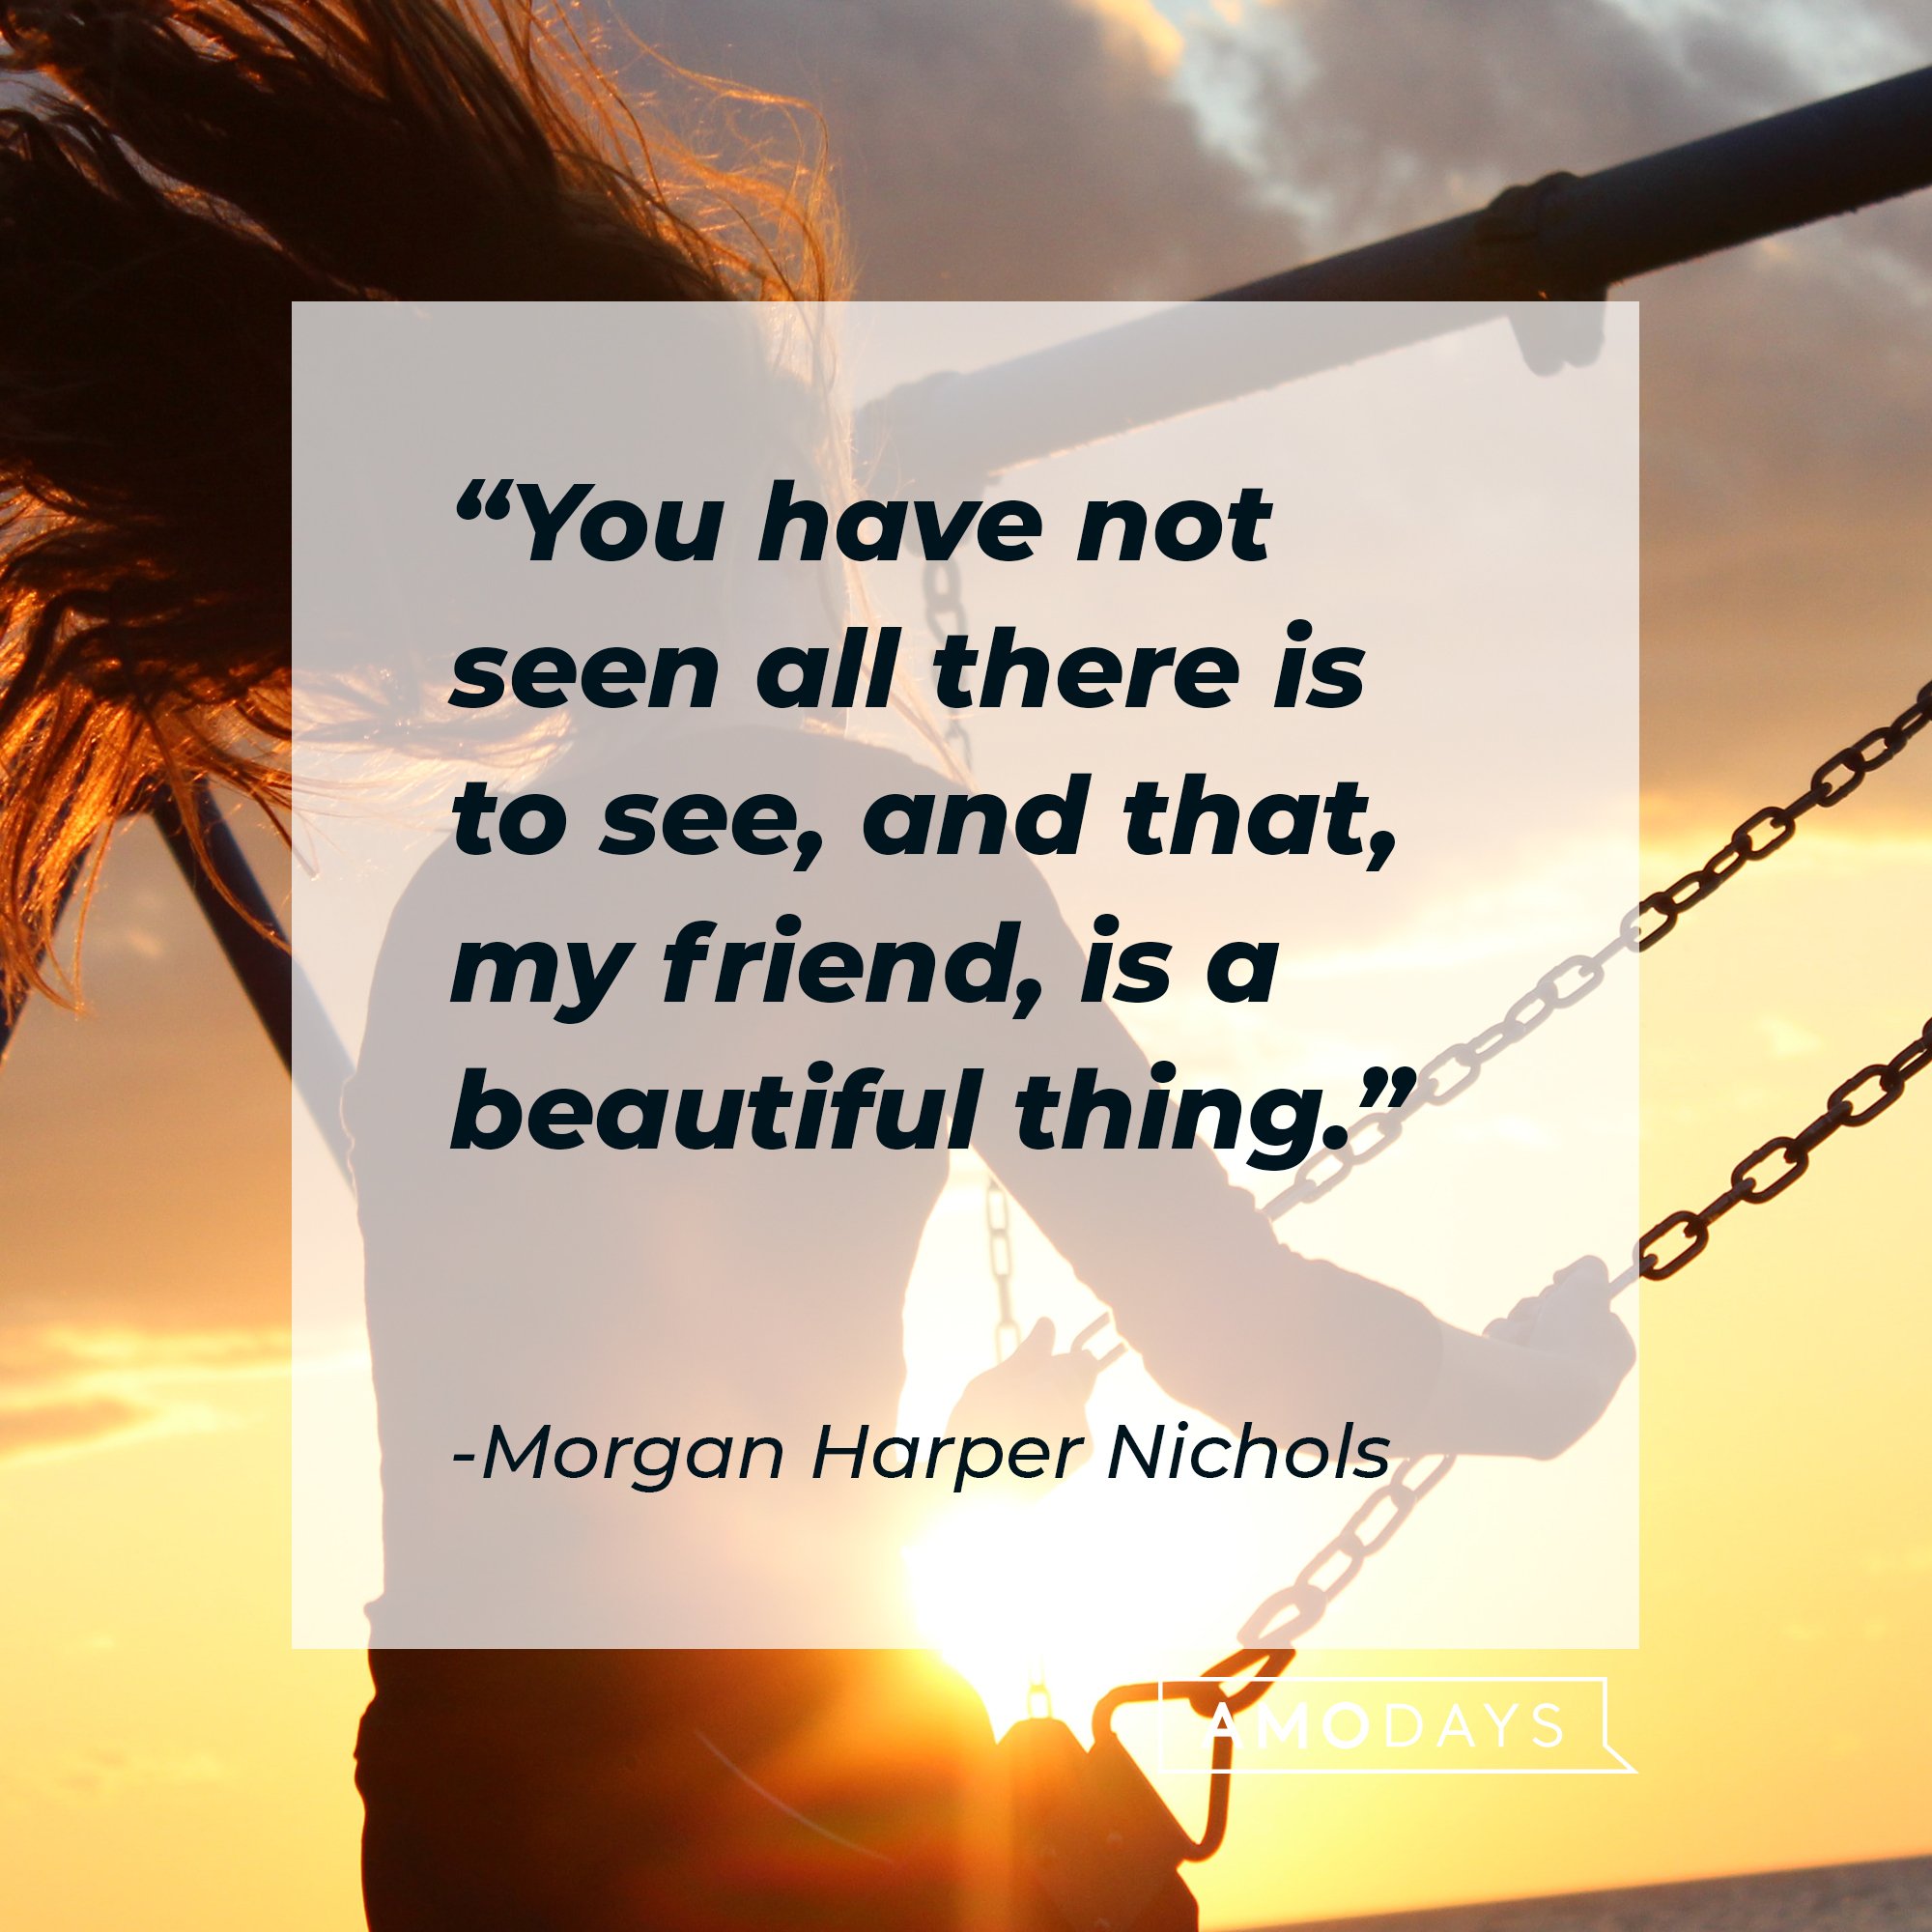 Morgan Harper Nichols’ quote: "You have not seen all there is to see, and that, my friend, is a beautiful thing."  | Image: AmoDays